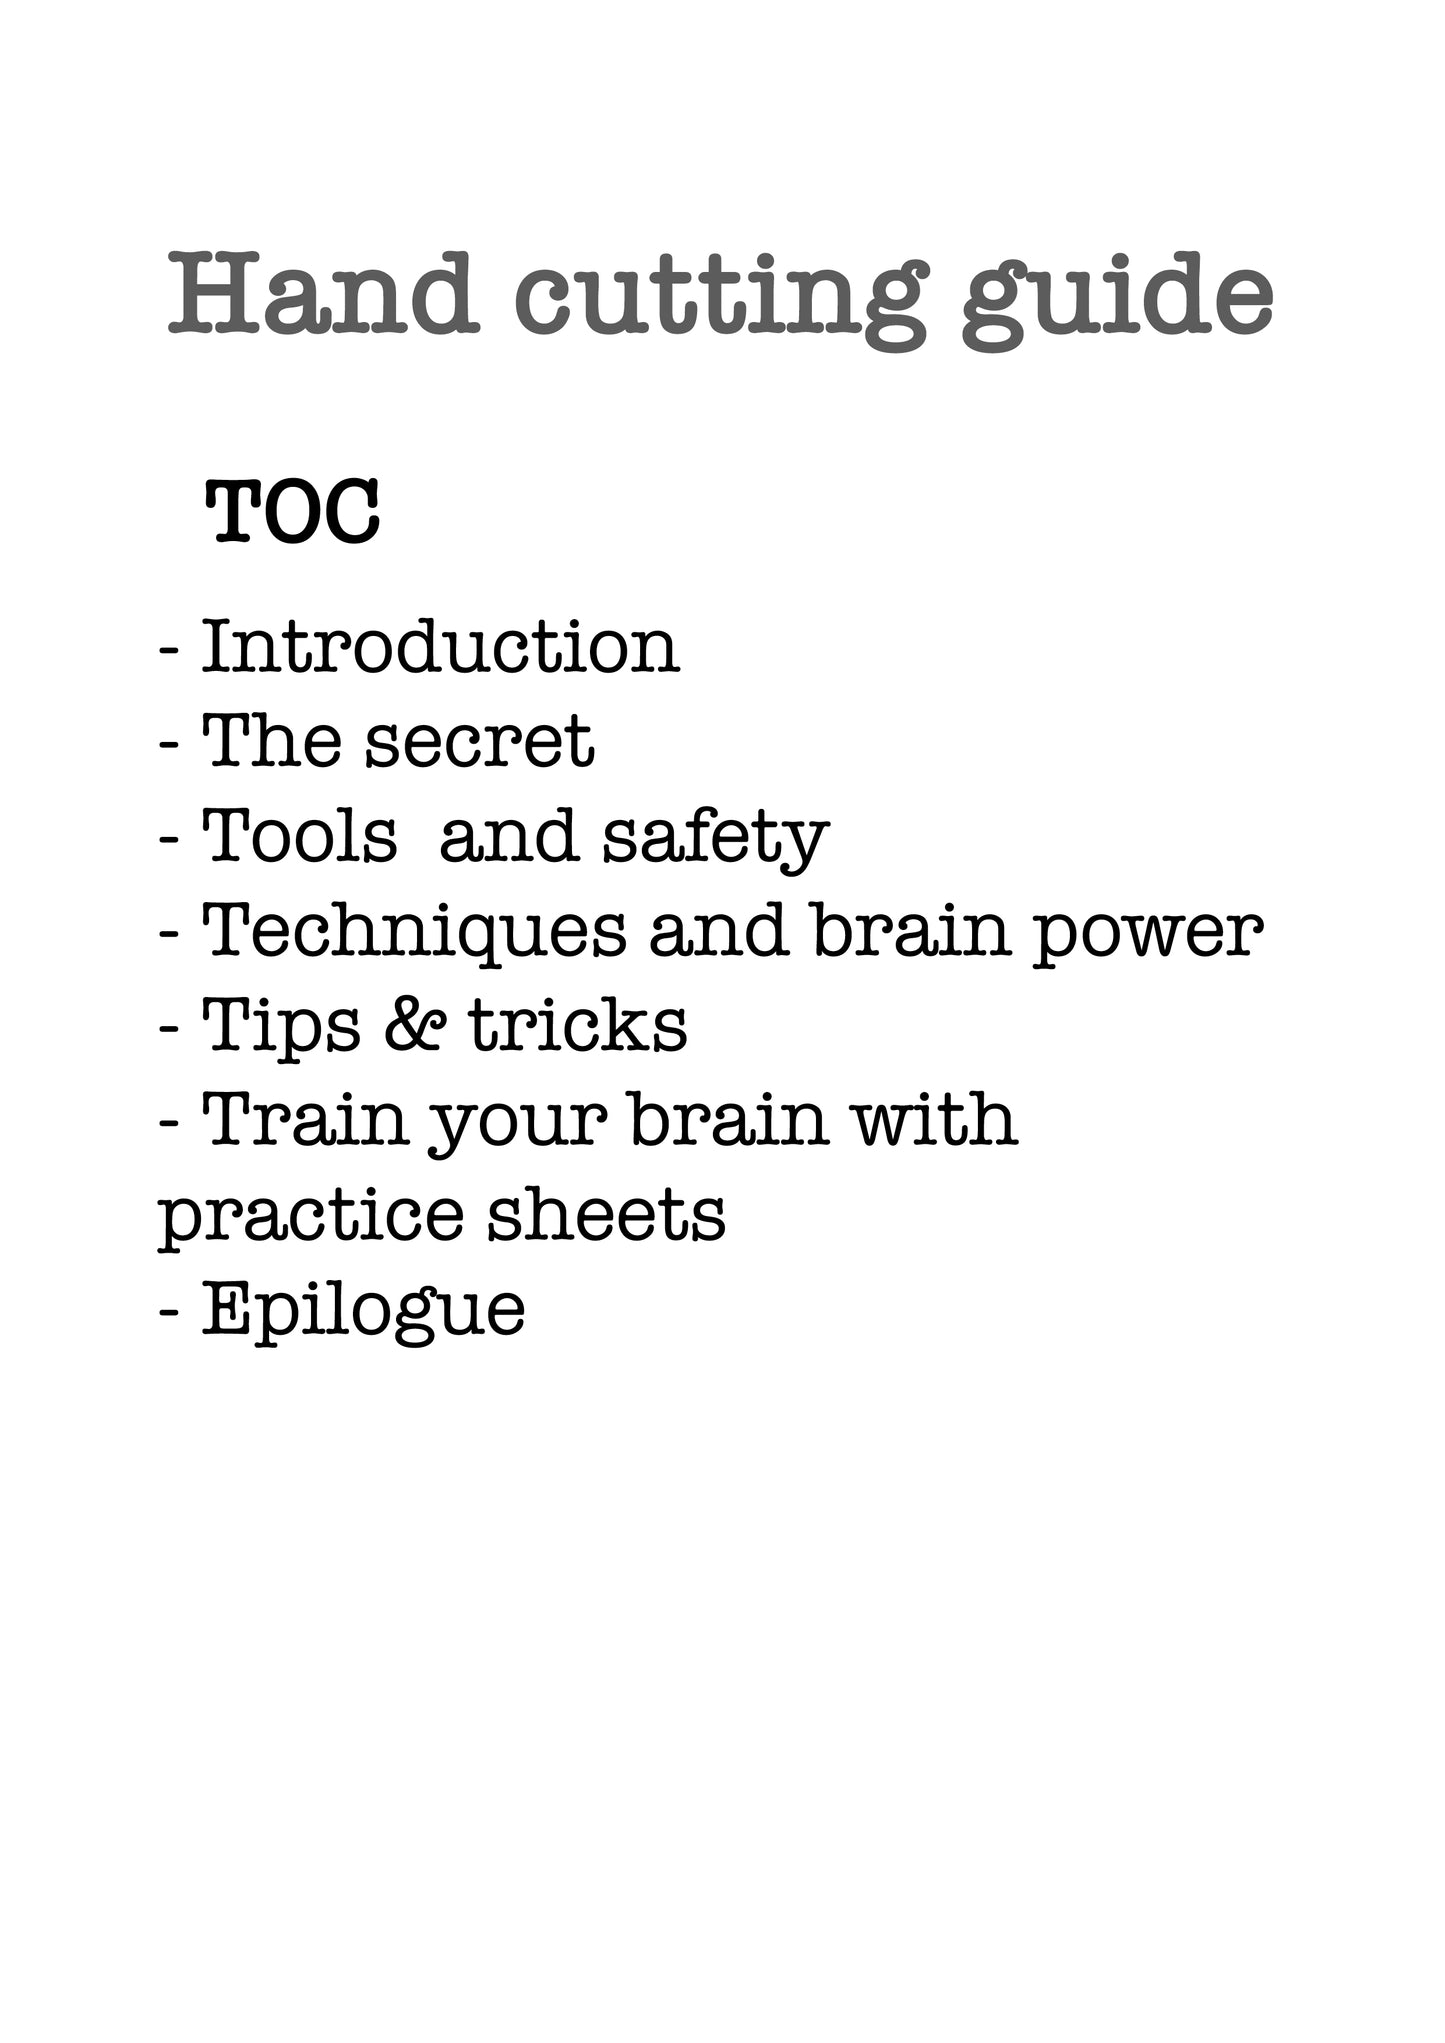 Hand cutting guide - “Use your brain to cut leather” - Hand cutting guidebook for leather makers